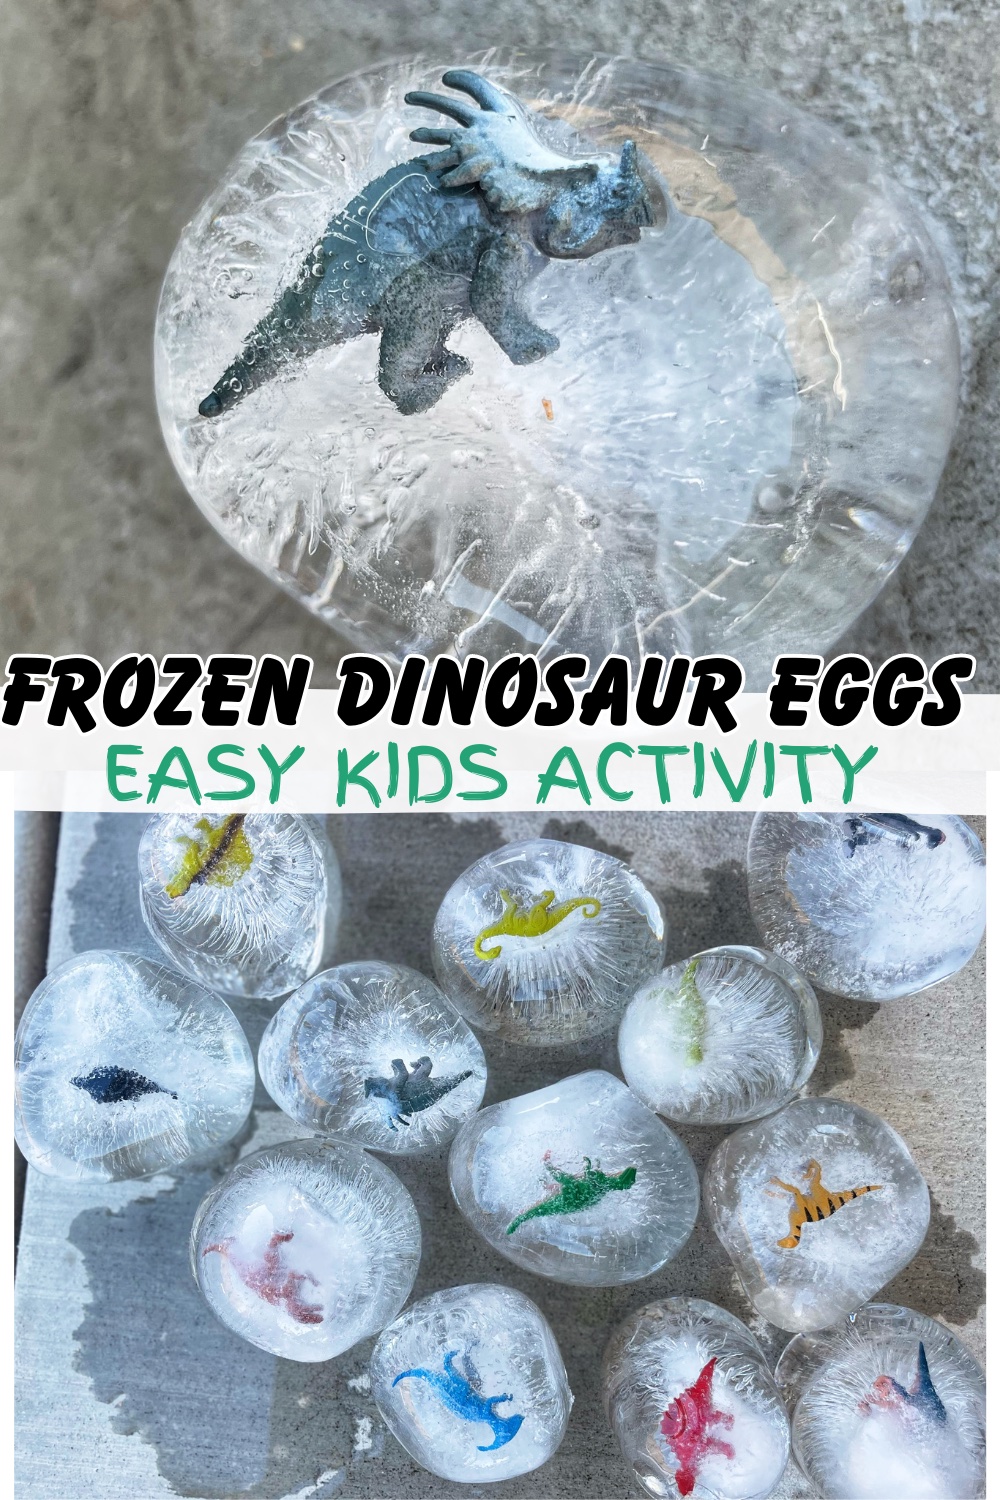 Are you looking for a fun outdoor activity for your children? Look no further. Frozen dinosaur eggs is the perfect learning activity for all ages! This fun science project will be sure to keep them busy for hours!